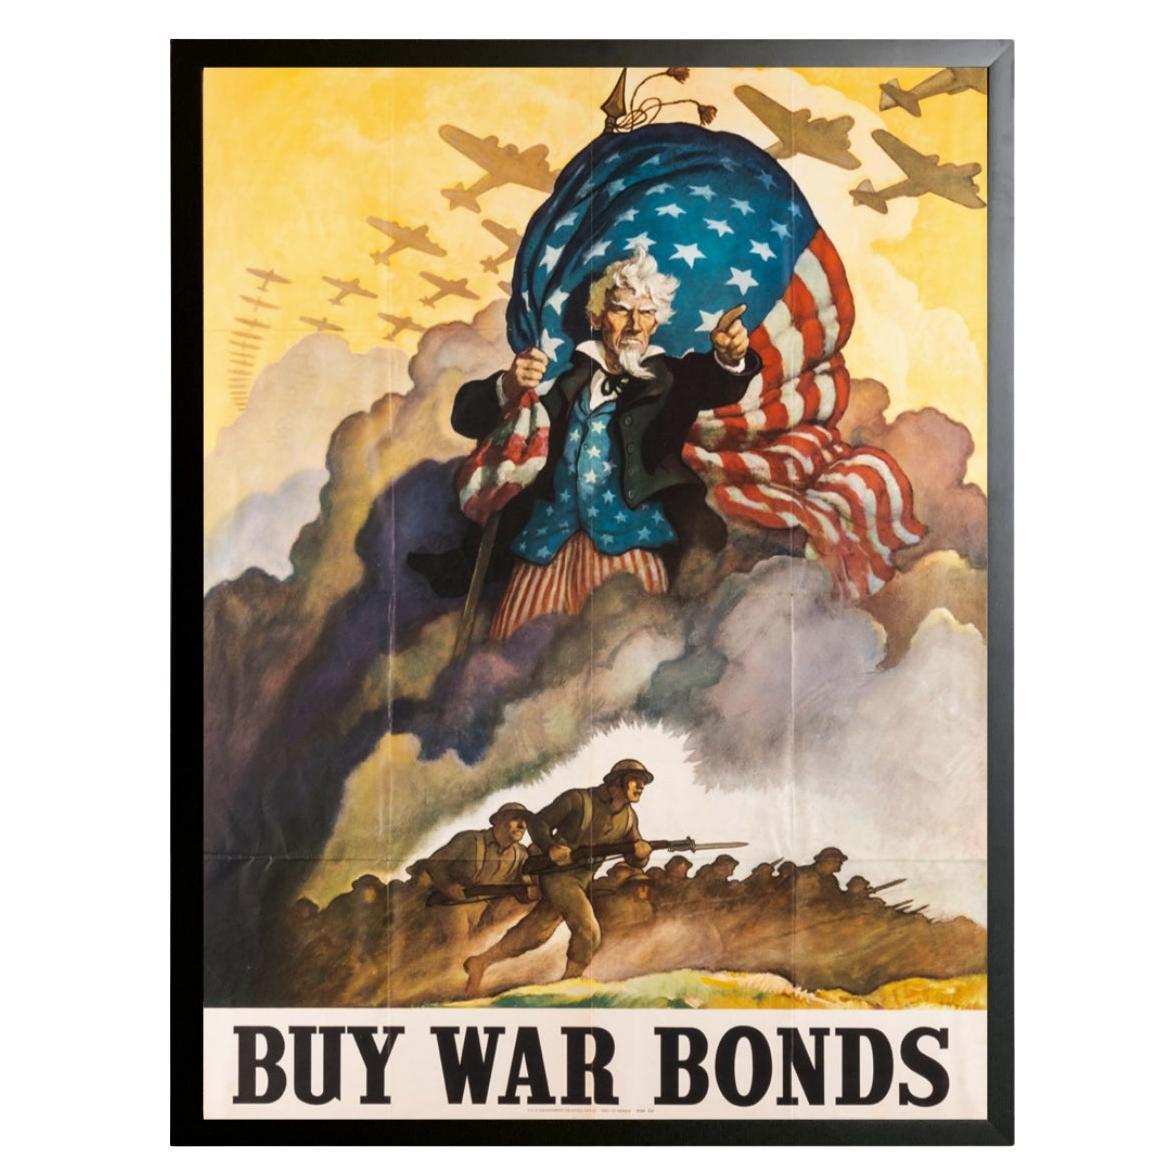 "Buy War Bonds" Vintage WWII Poster by Newell Convers Wyeth, 1942 For Sale